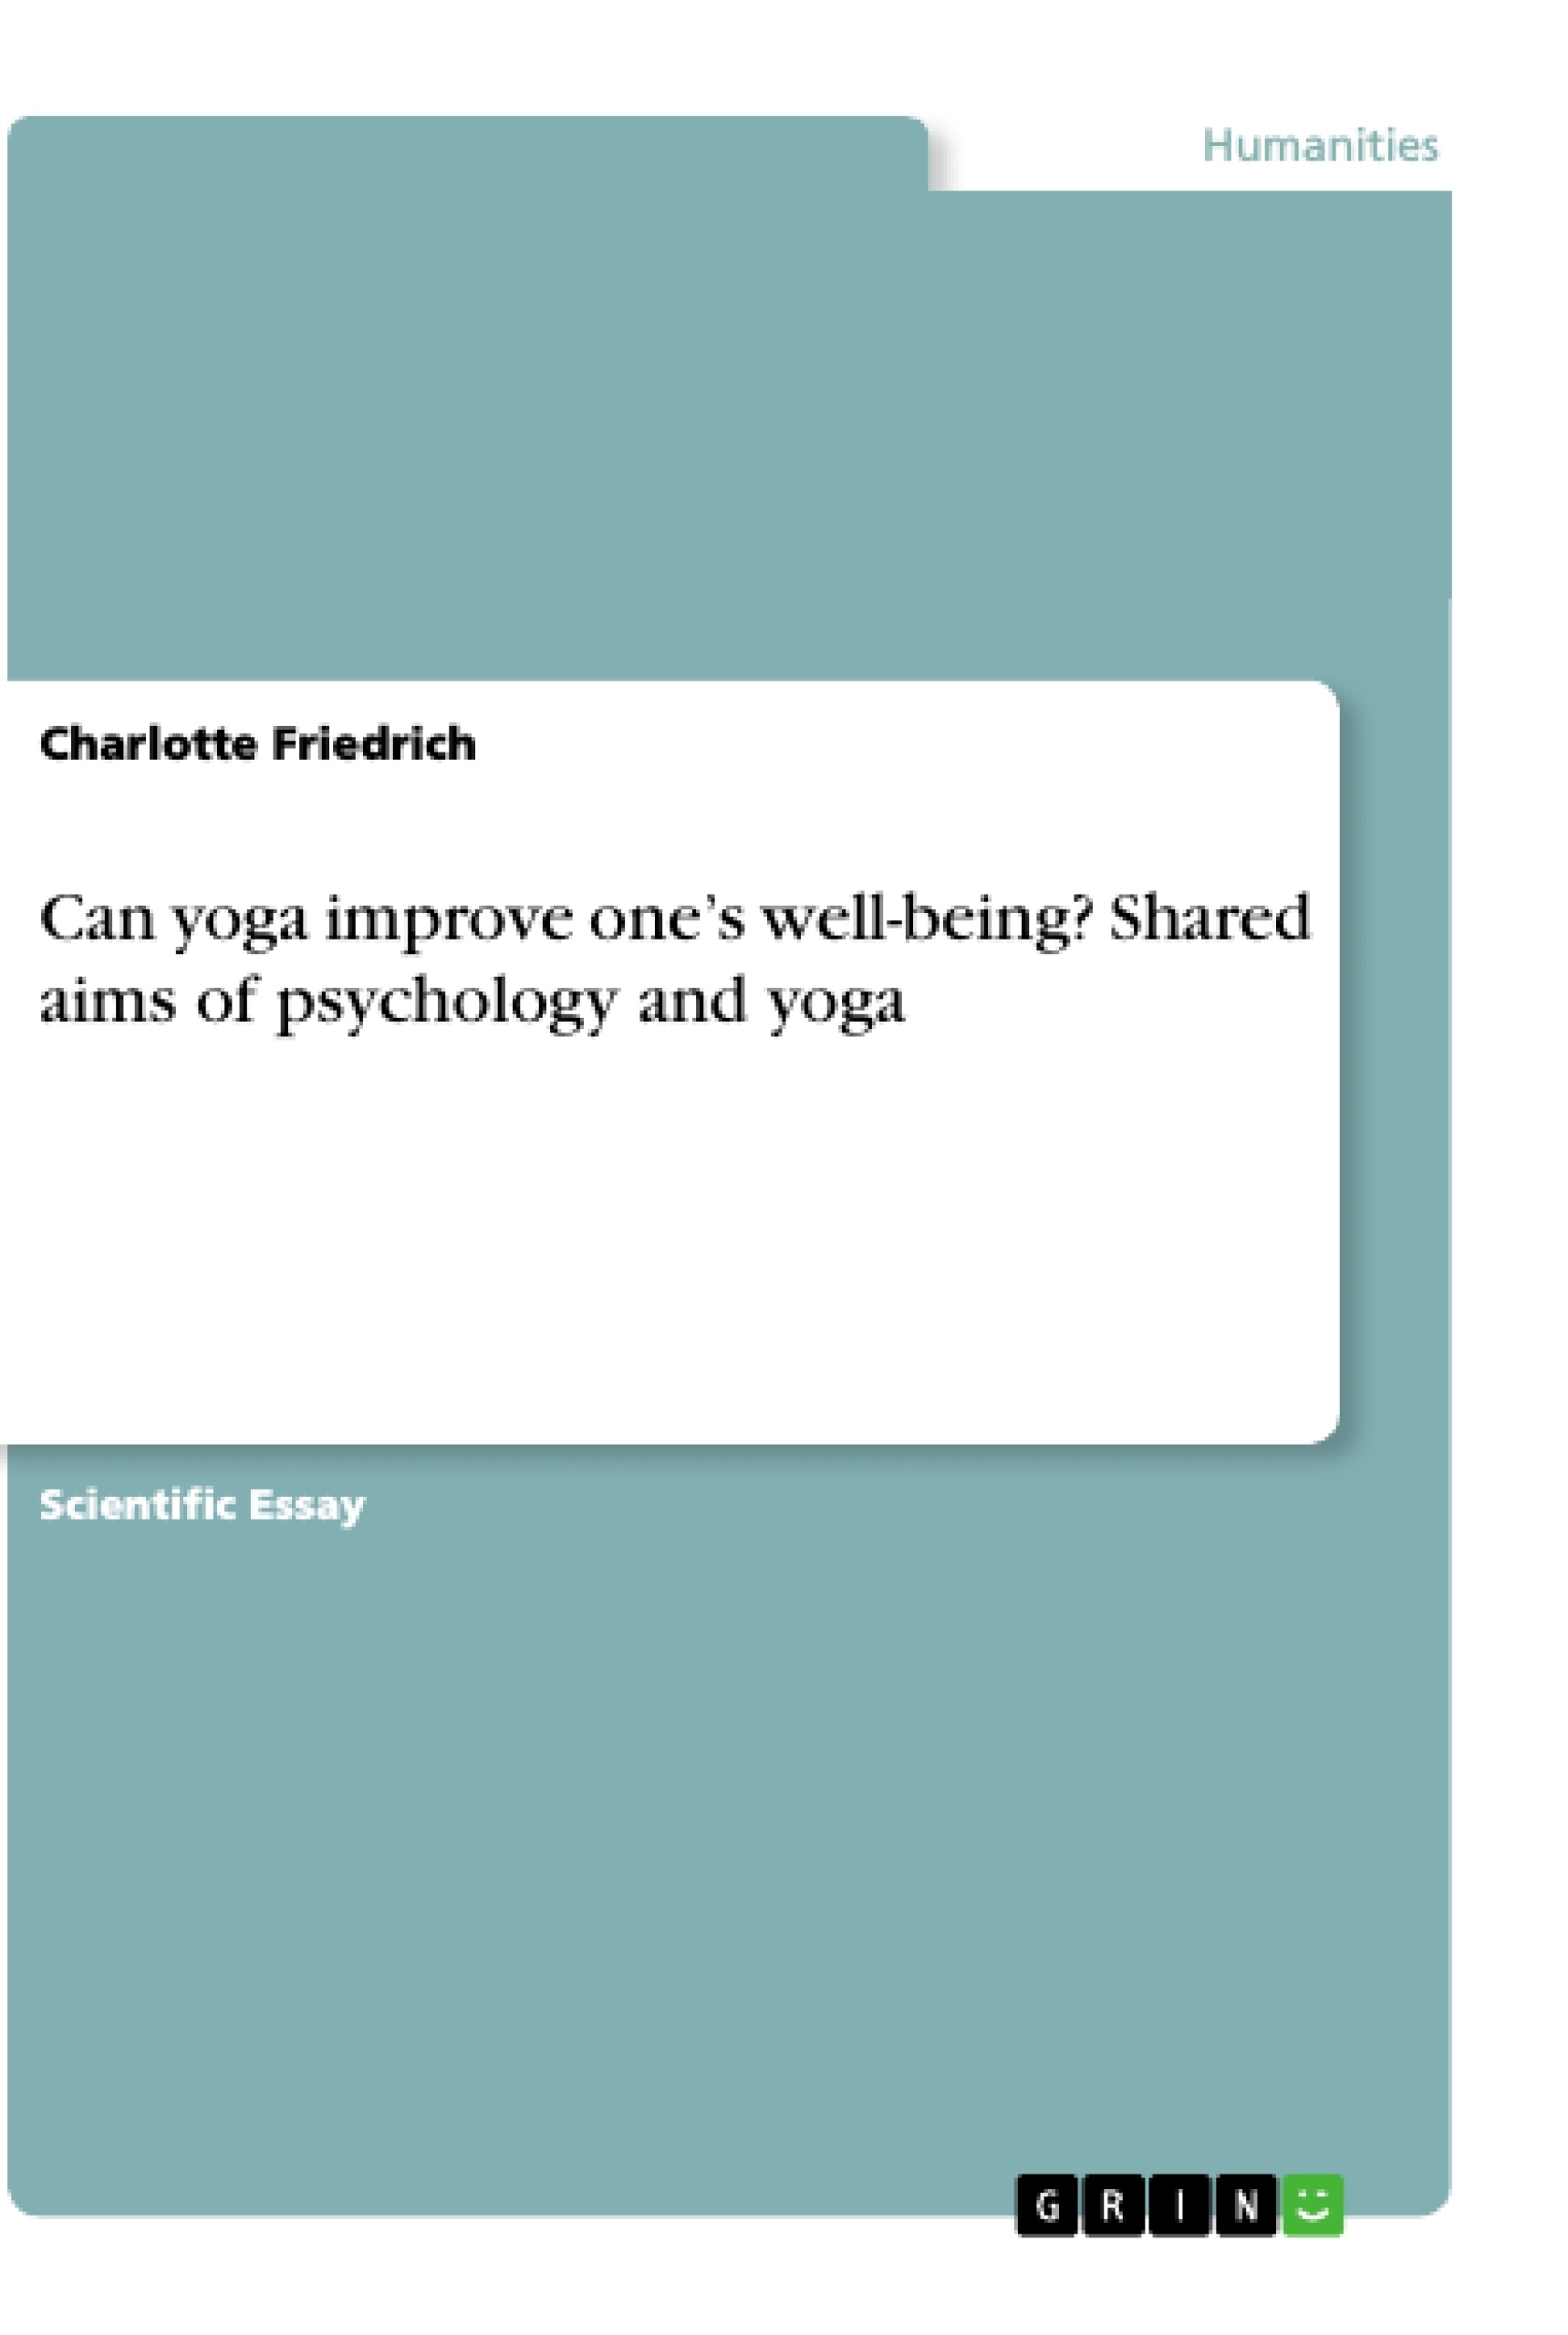 Title: Can yoga improve one’s well-being? Shared aims of psychology and yoga